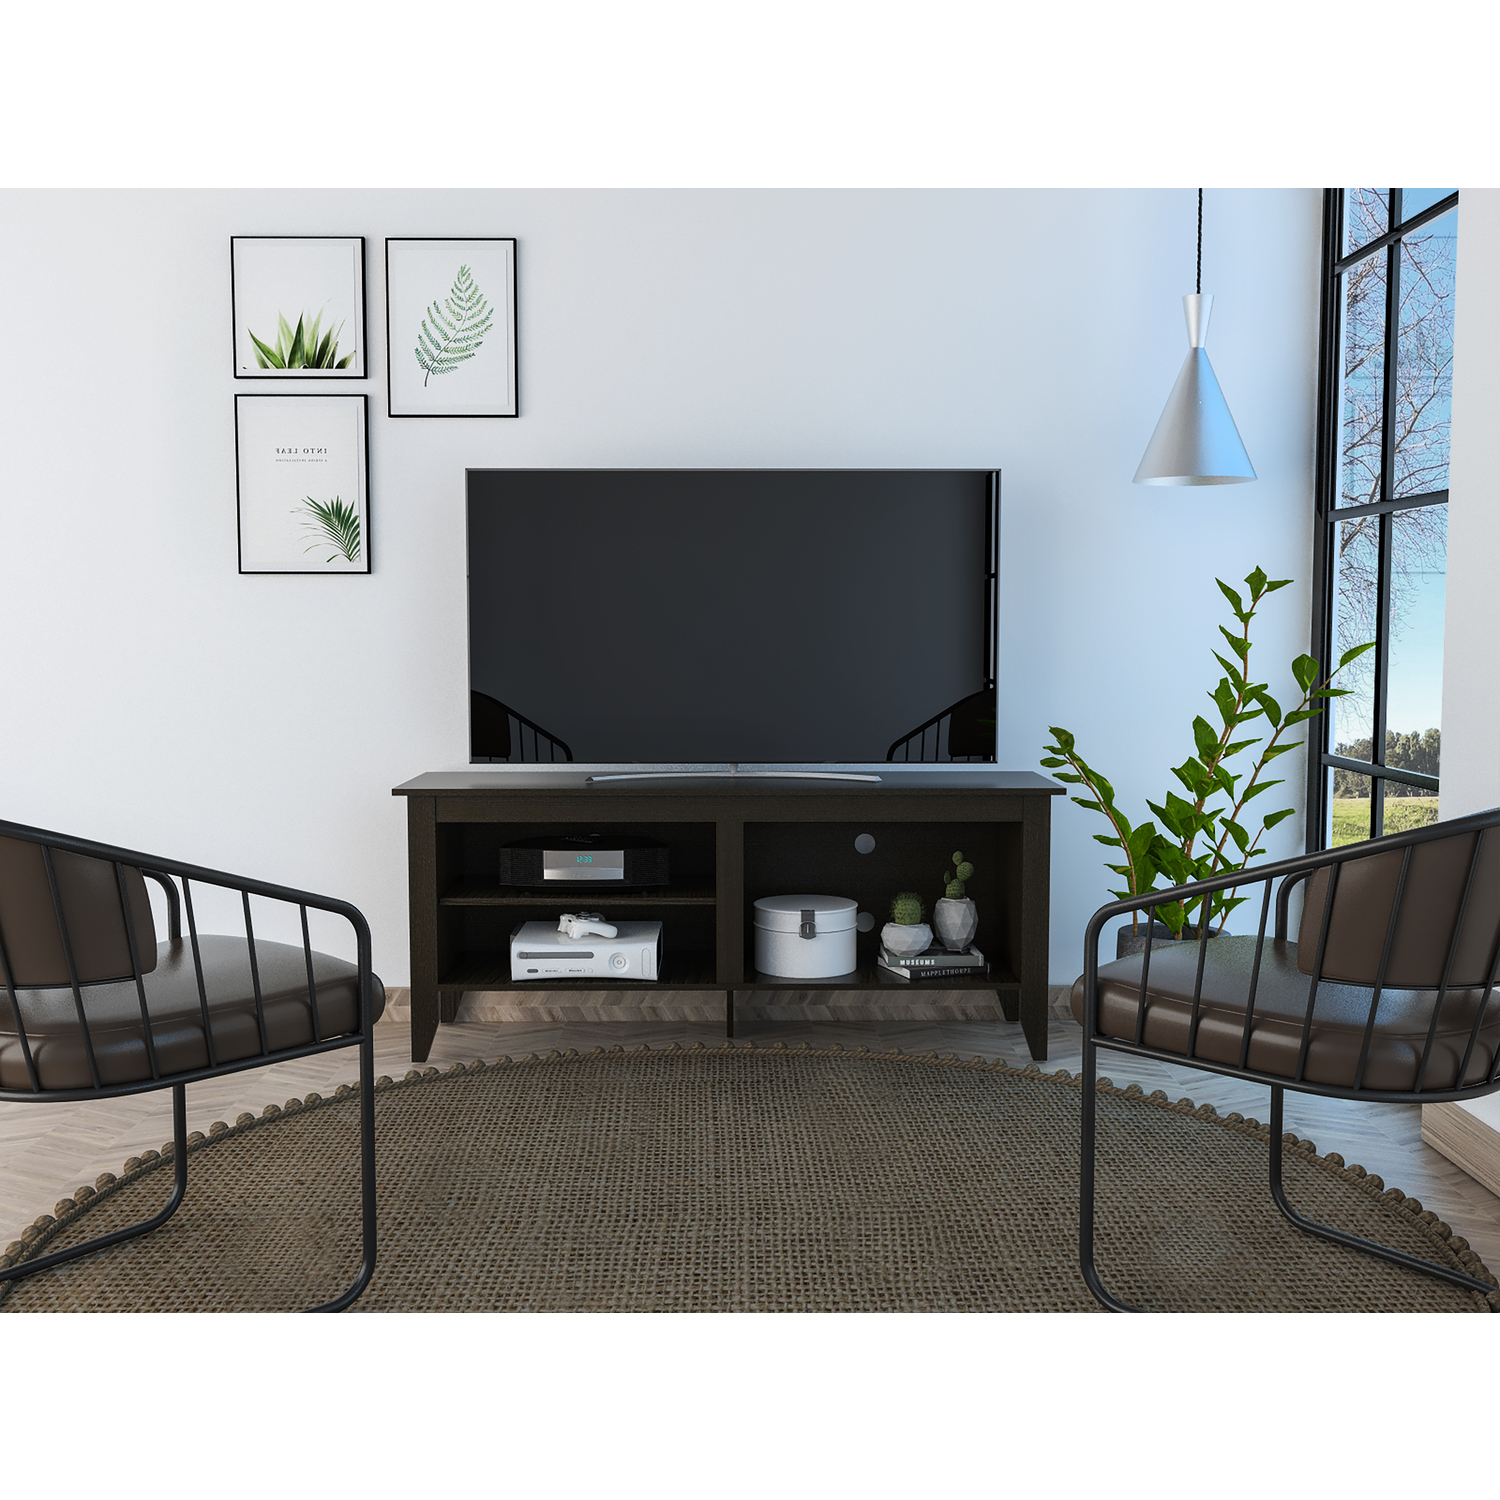 TUHOME Essential TV Stand Black Wengue - image 1 of 1